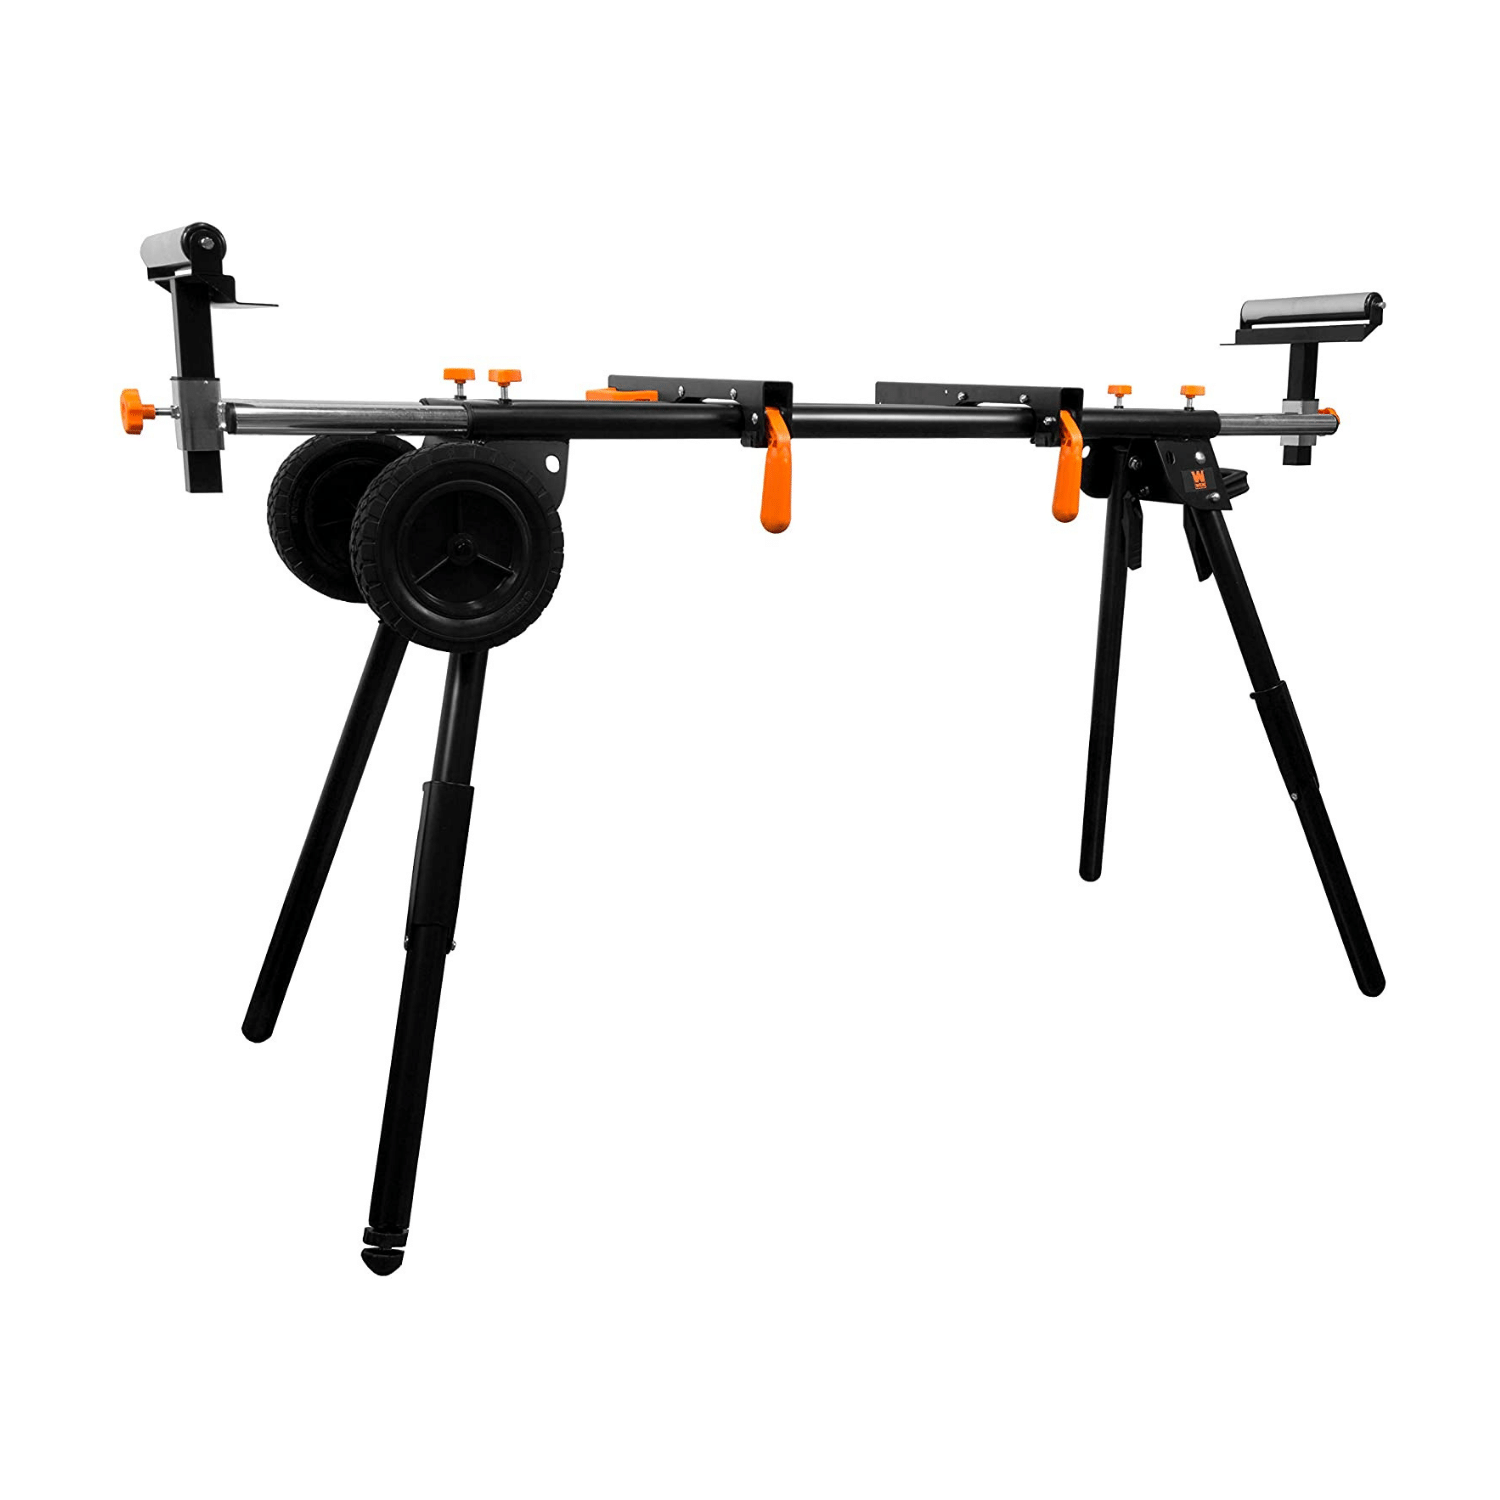 Wen MSA330 Collapsible Rolling Miter Saw Stand With 3 Onboard Outlets